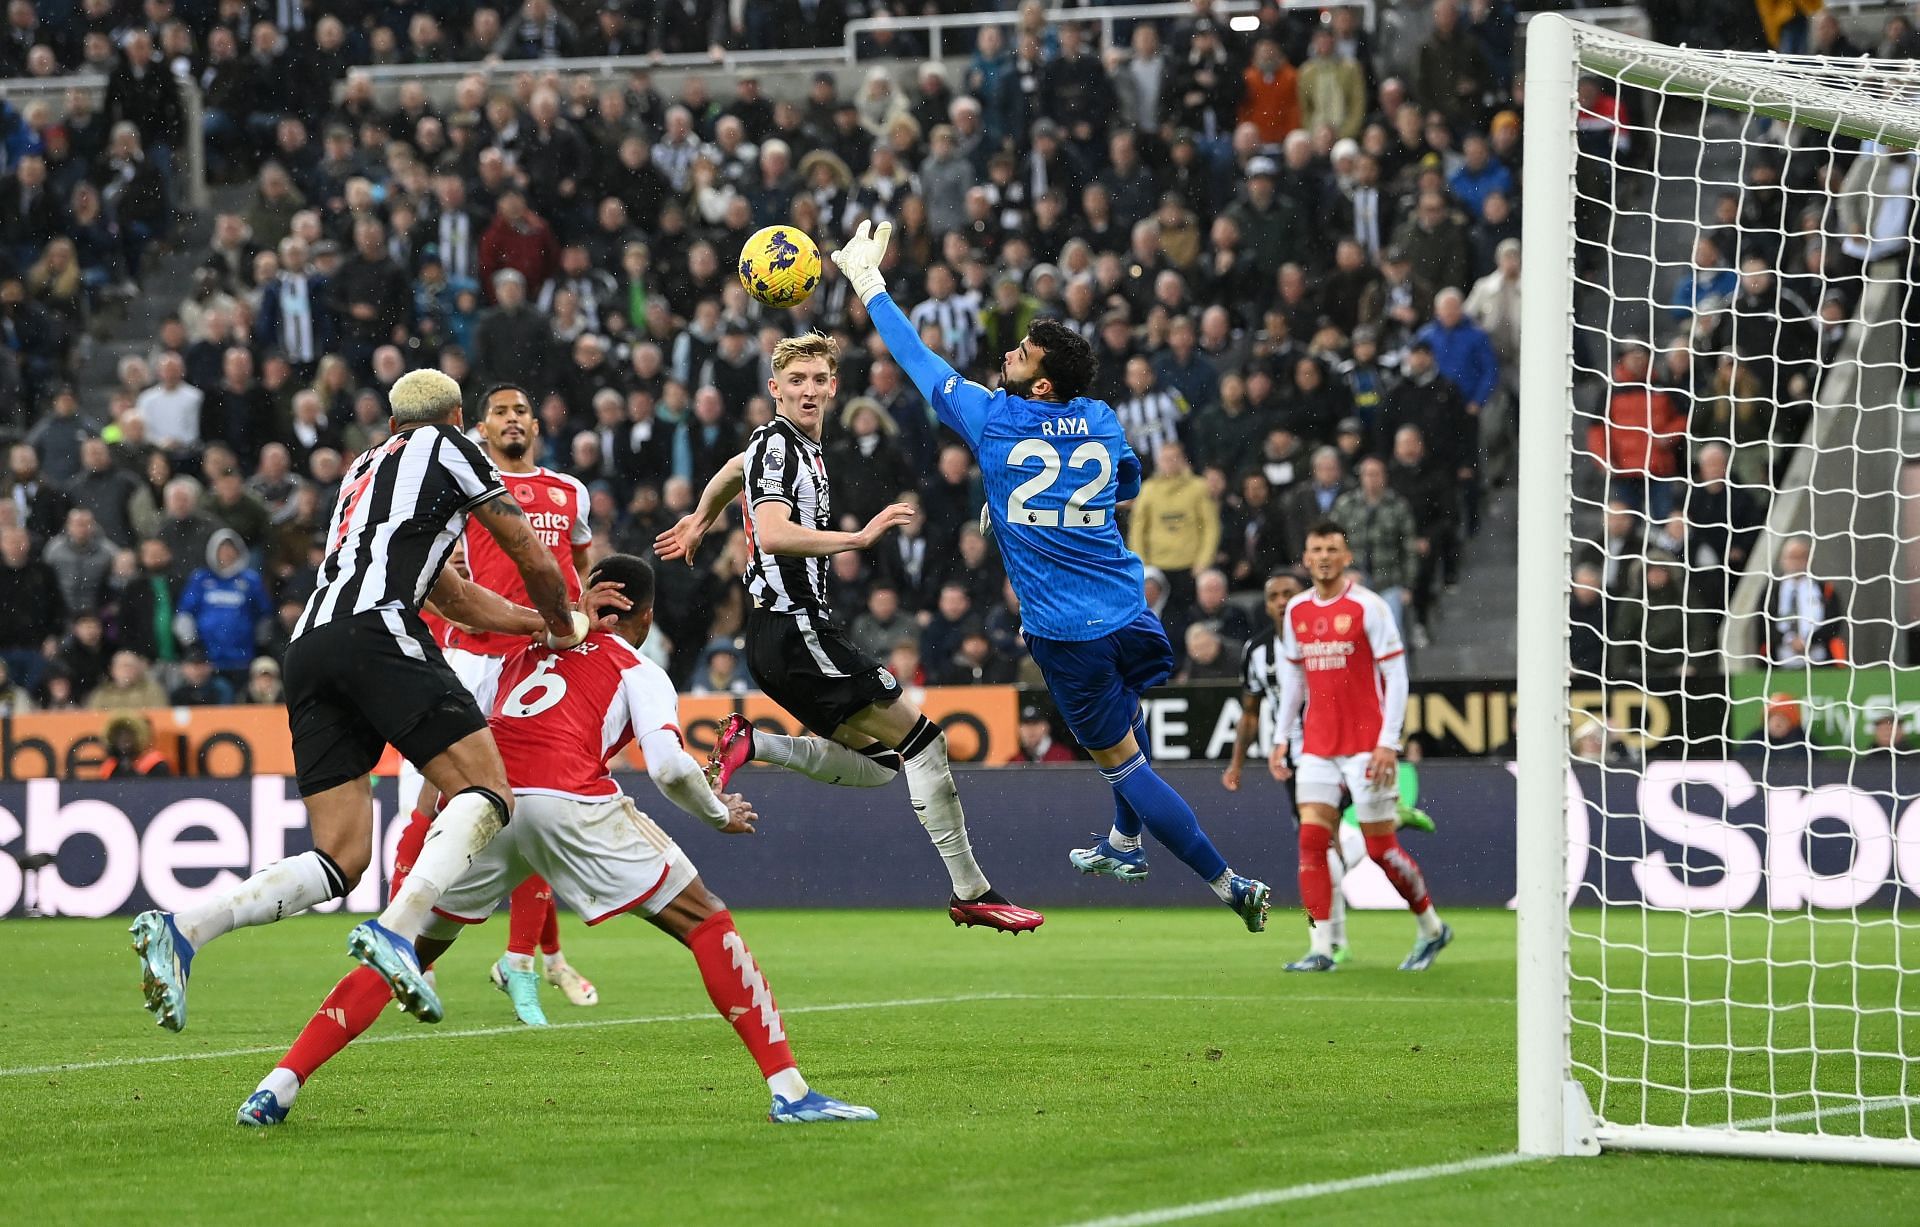 Newcastle United take on Arsenal this weekend